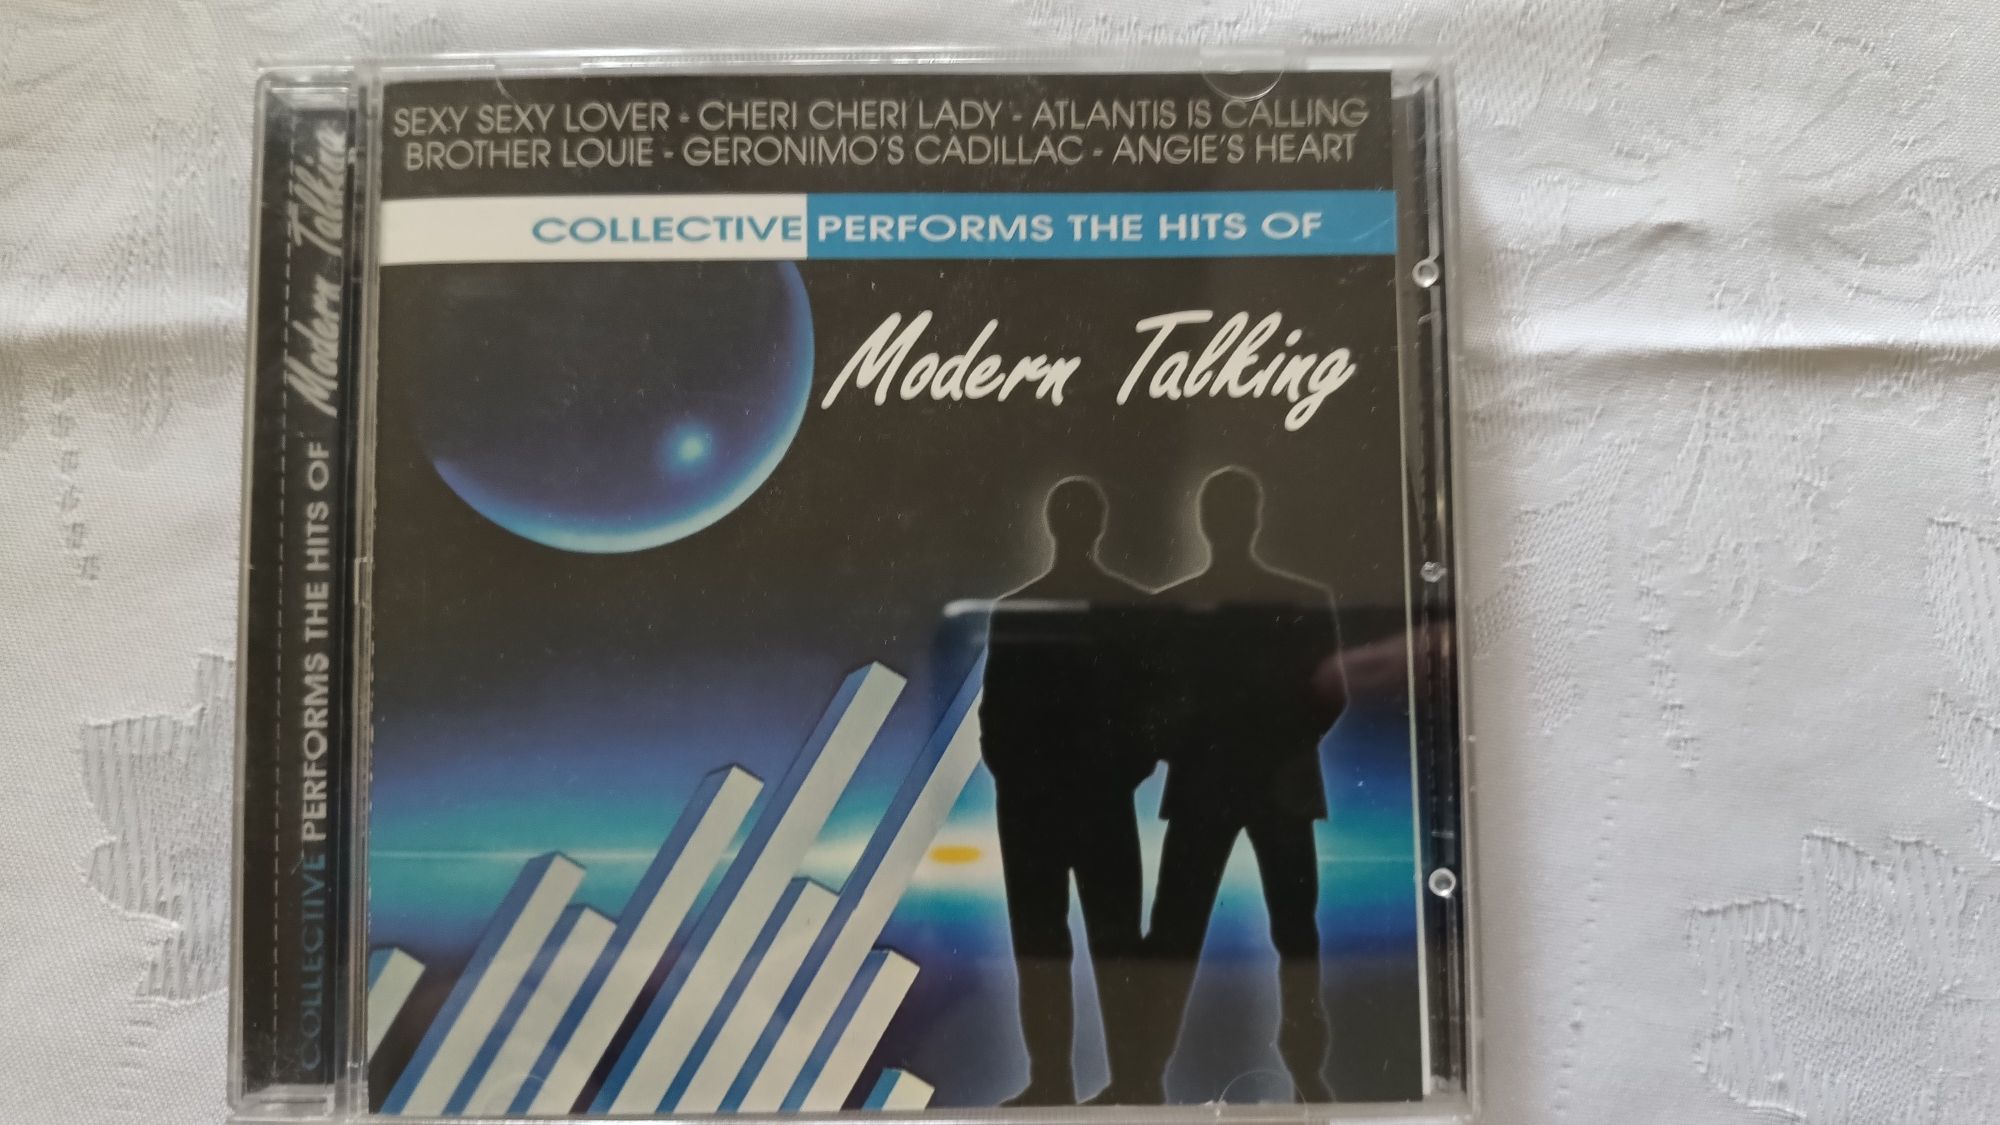 Collective Performs the Hits of Modern Talking CD